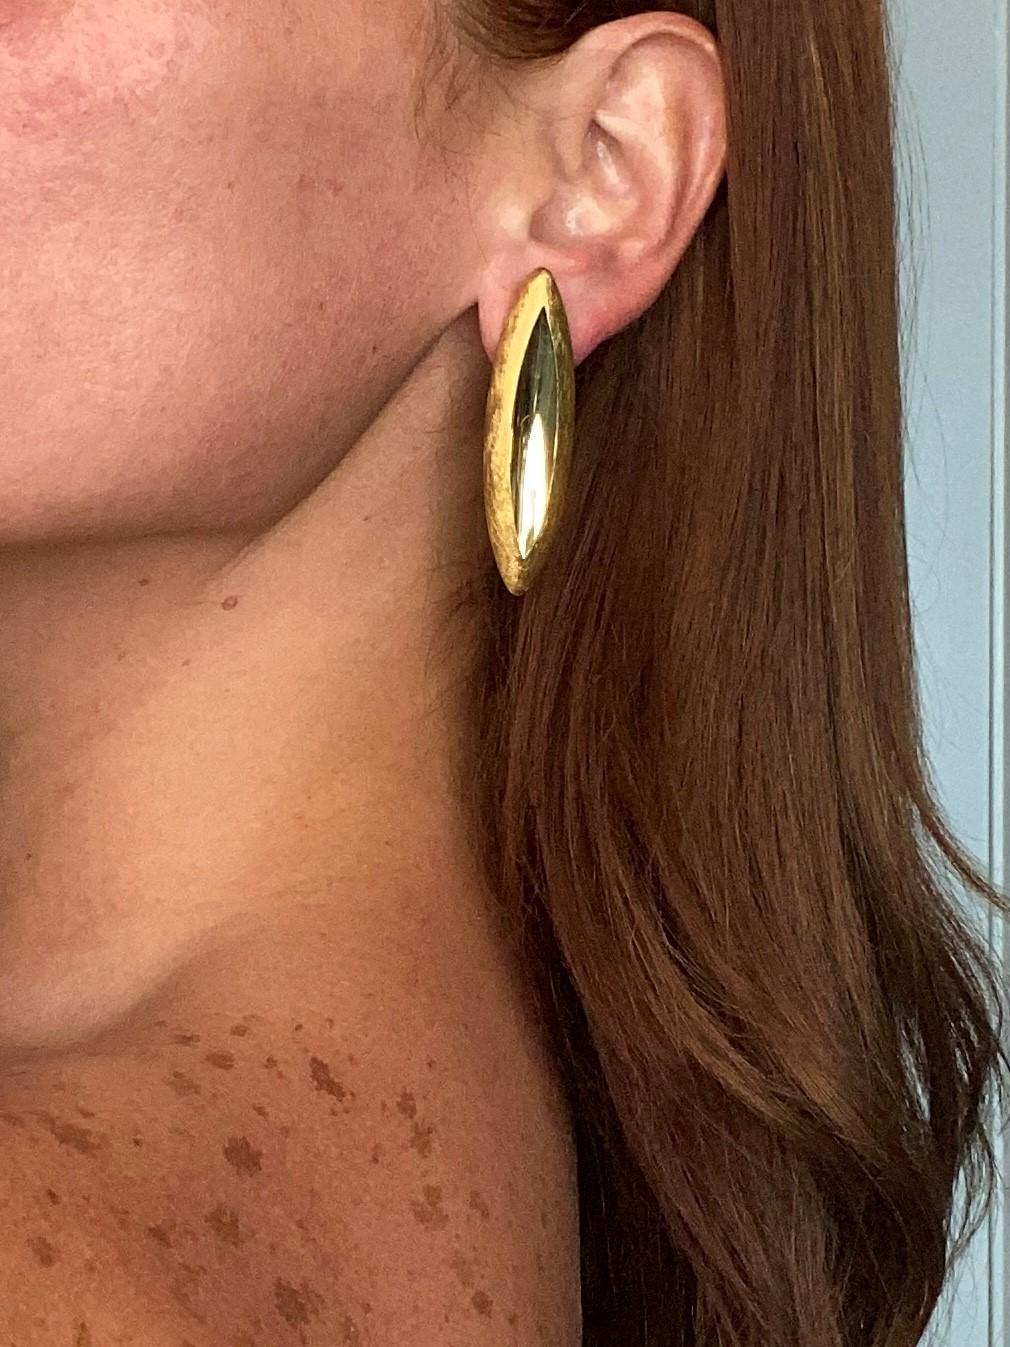 Anish Kapoor 2010 London Rare Pair of Sculptural Torpedo Earrings in 18Kt Gold For Sale 3